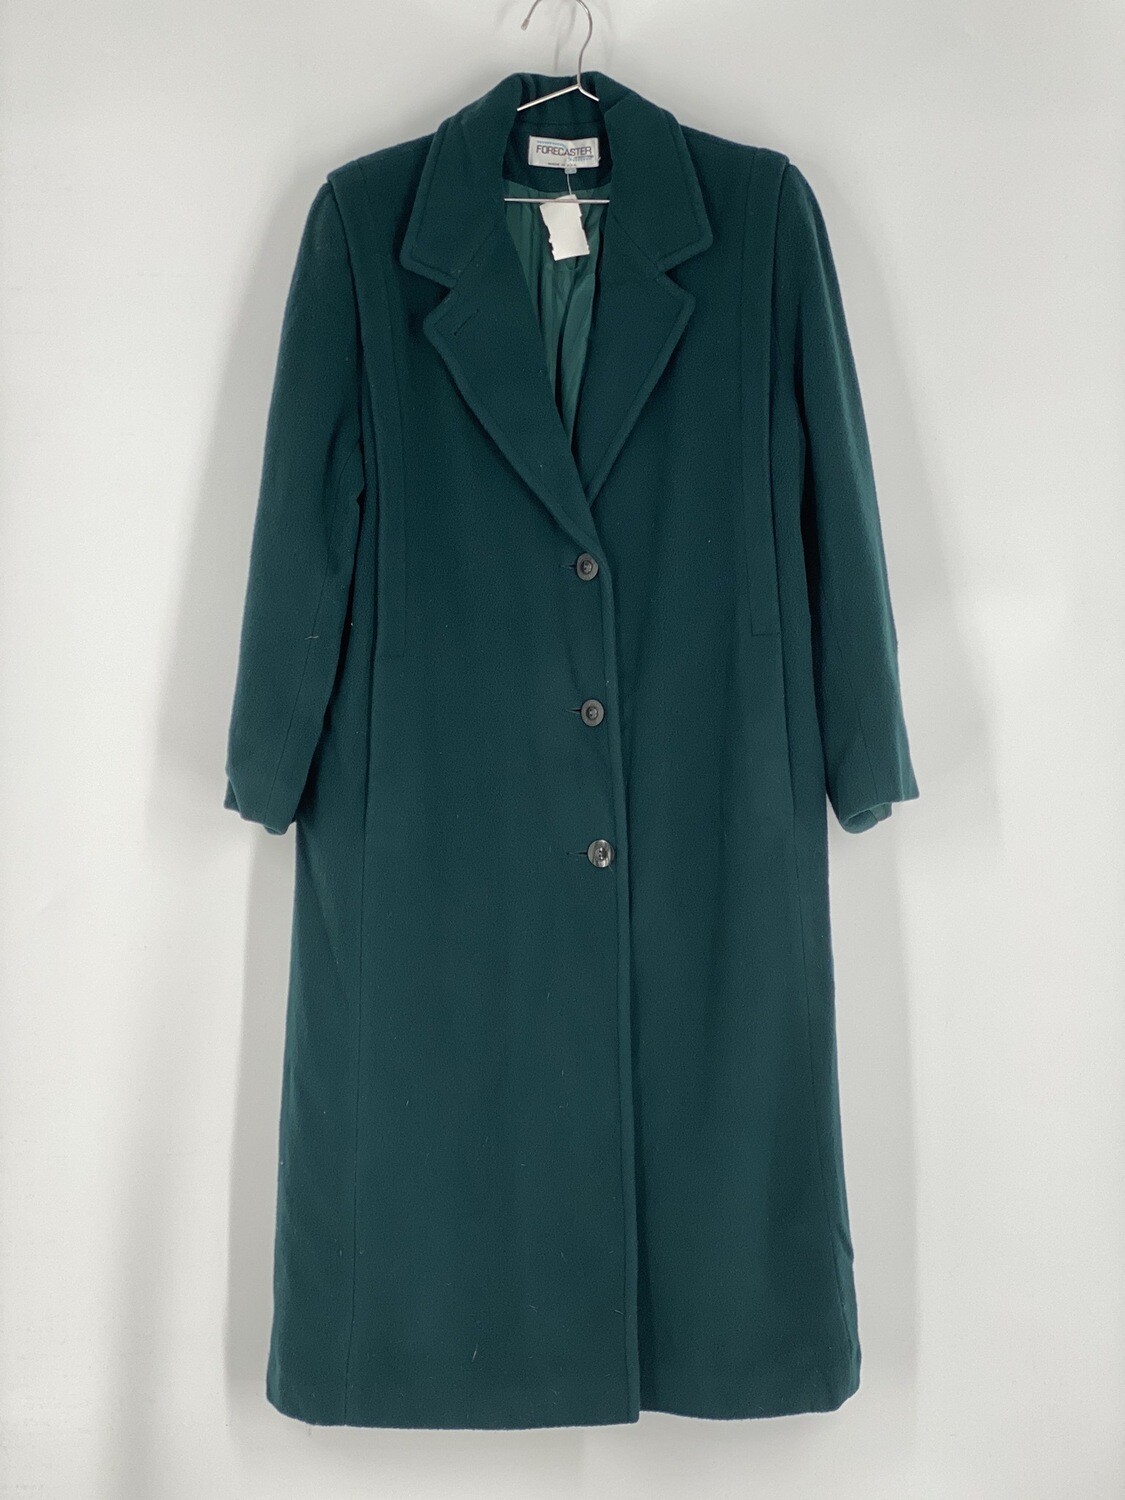 Forecaster Forest Green Trench Coat Size M